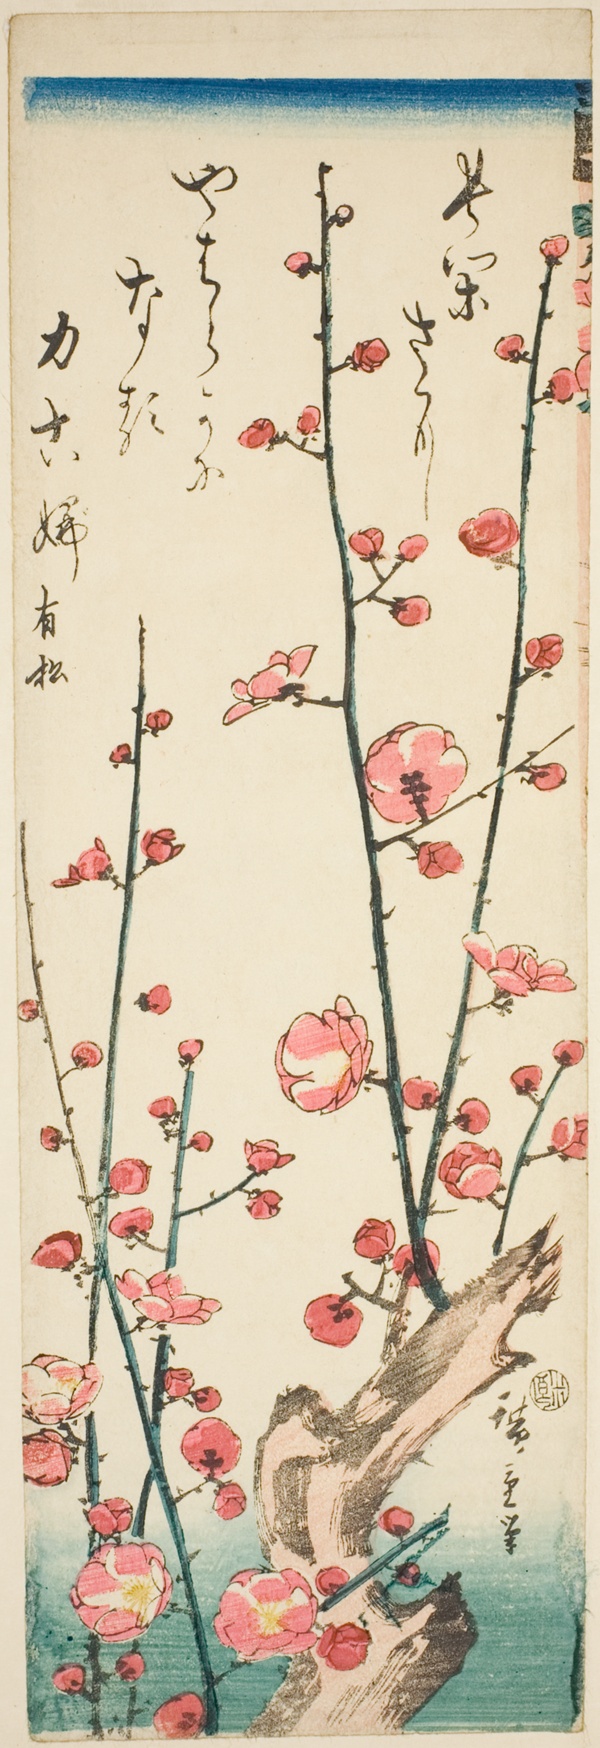 Blossoming plum branches